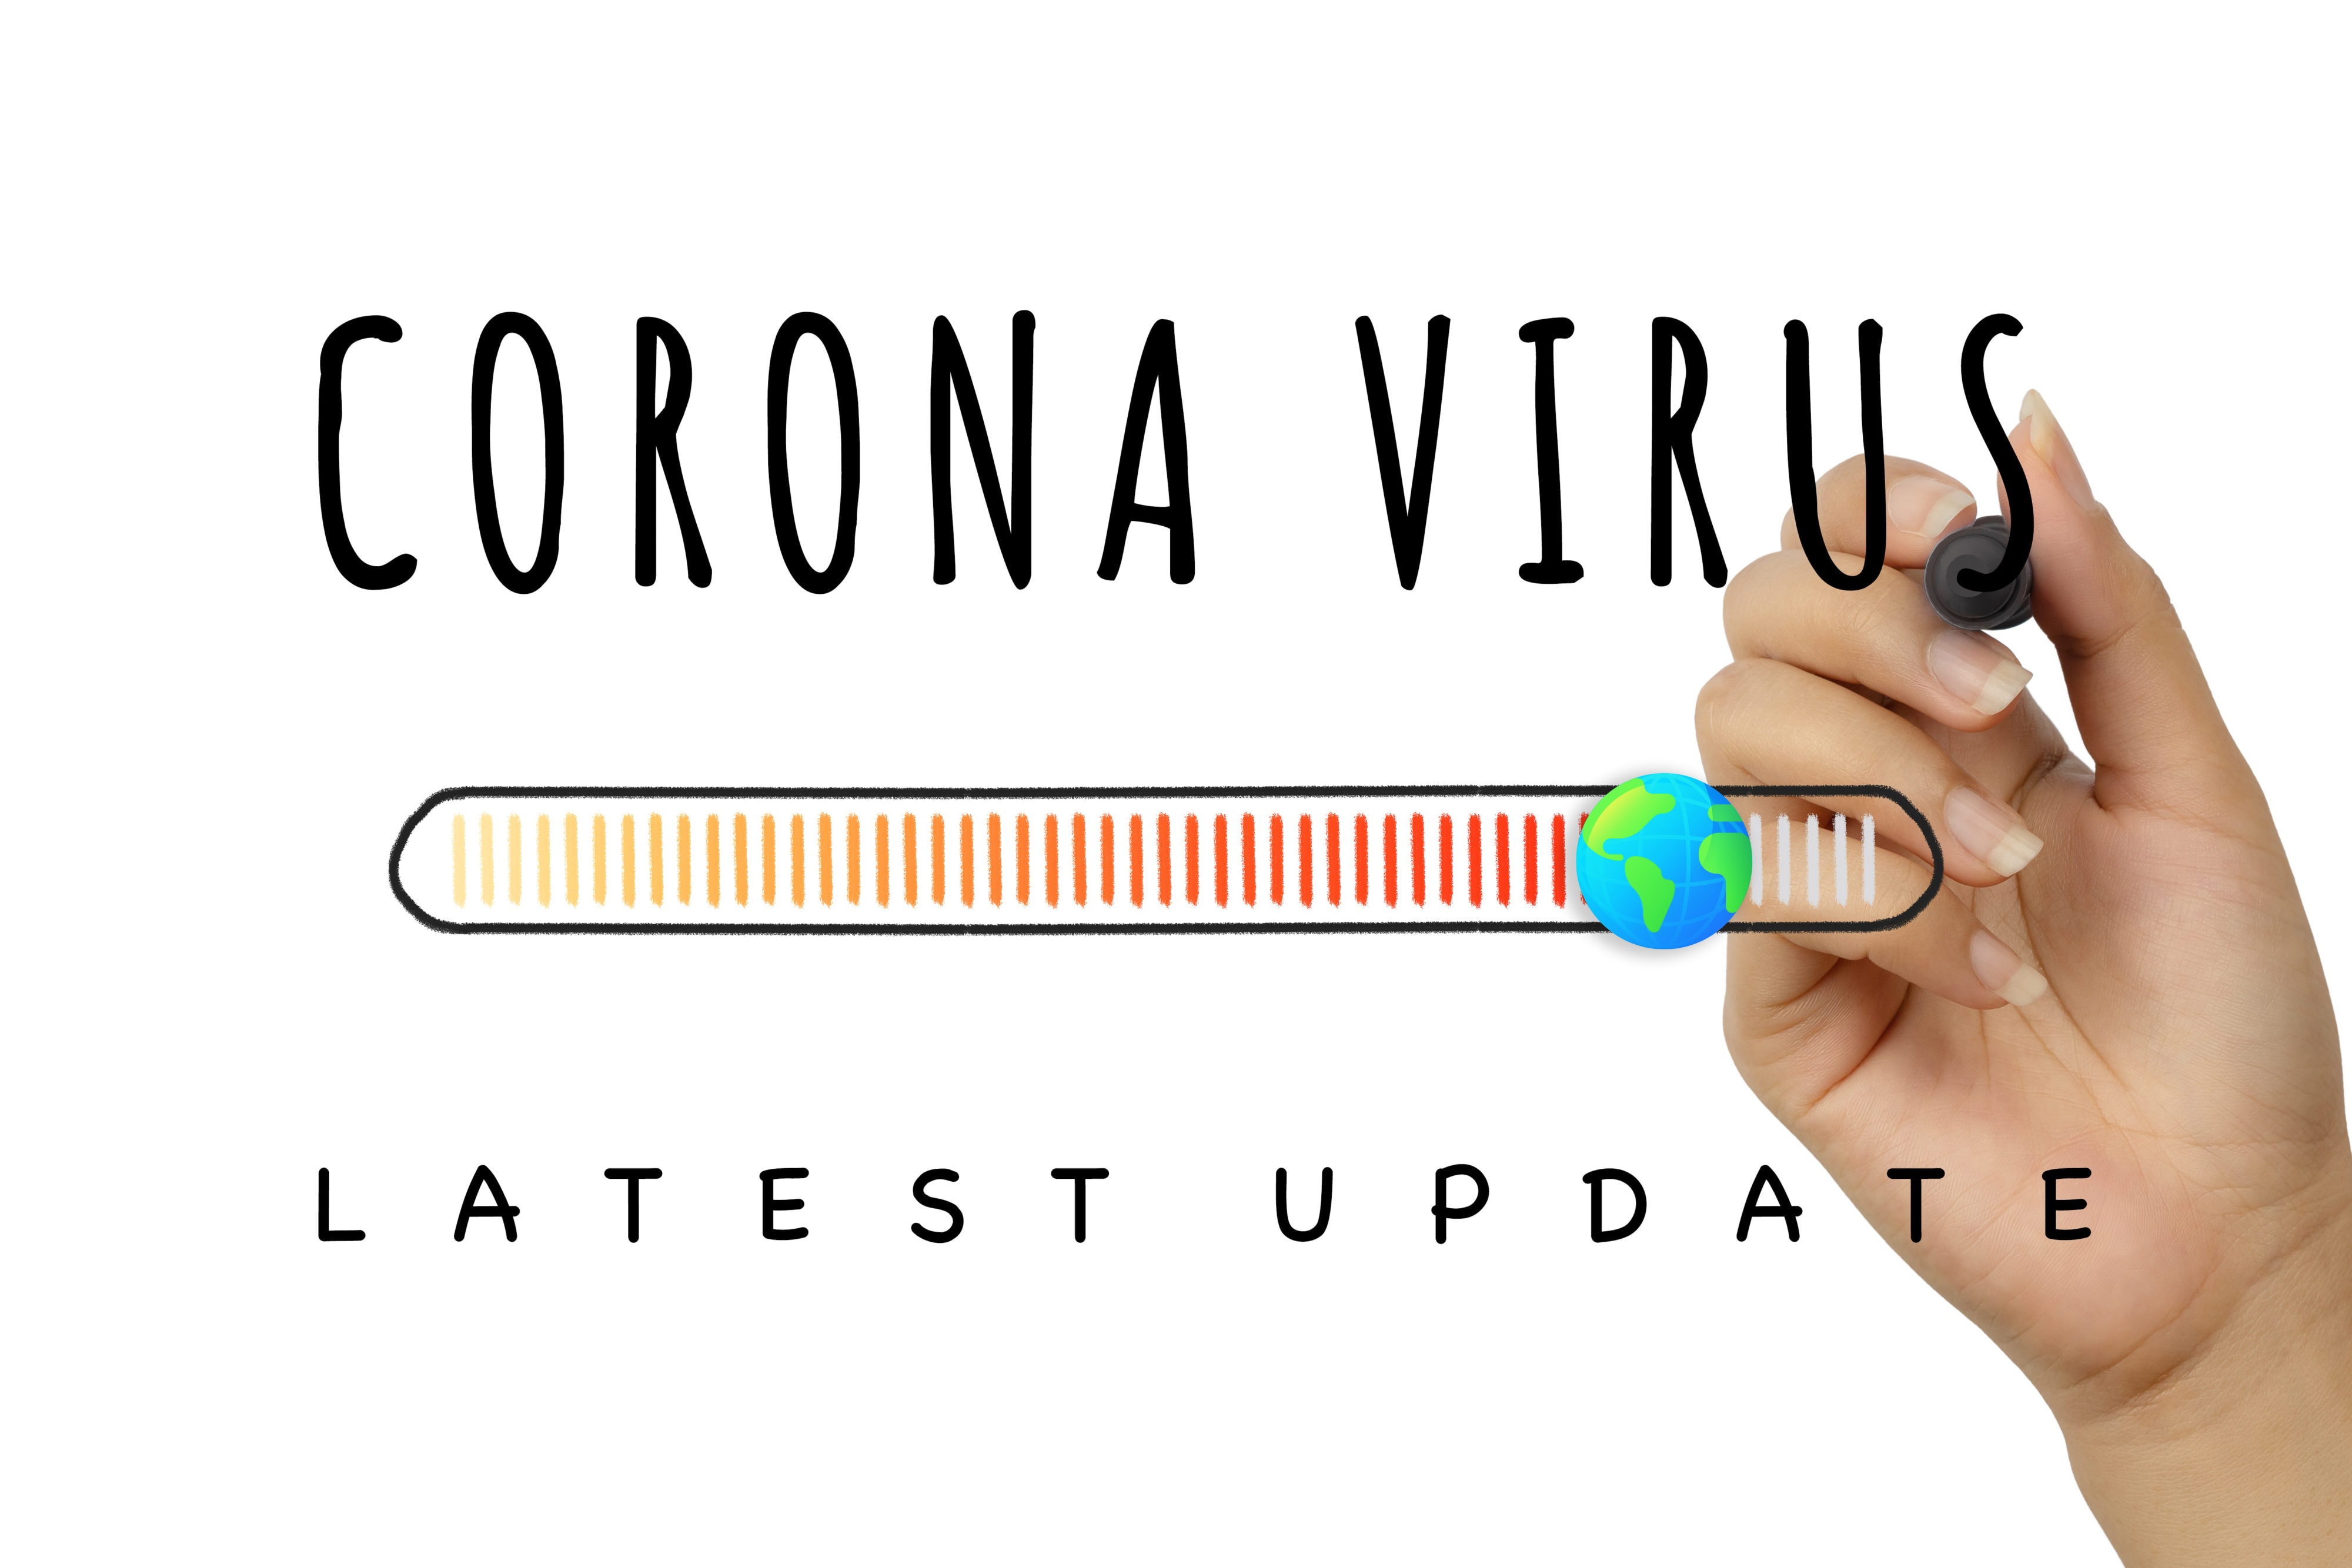 Corona Virus latest update hand written sign with loading bar concept